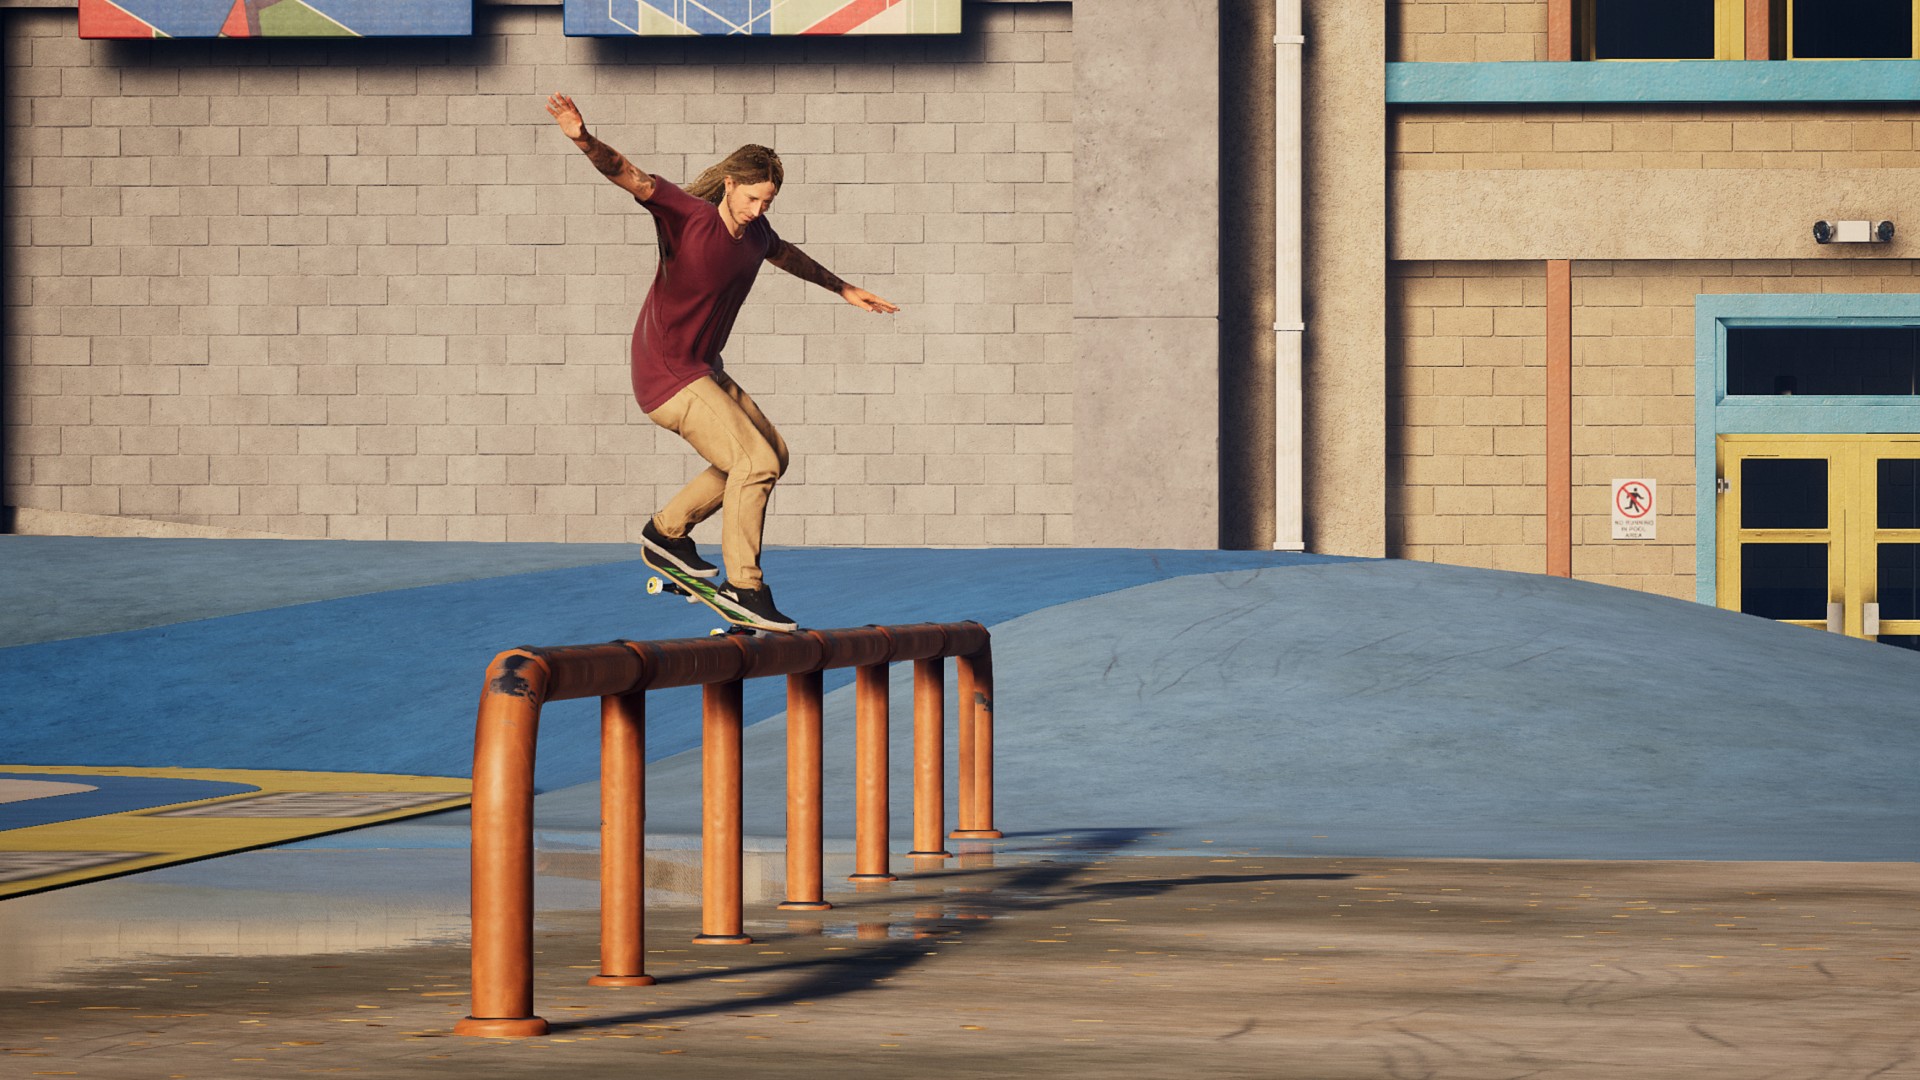 How to create a custom character in Tony Hawk's Pro Skater 1 and 2